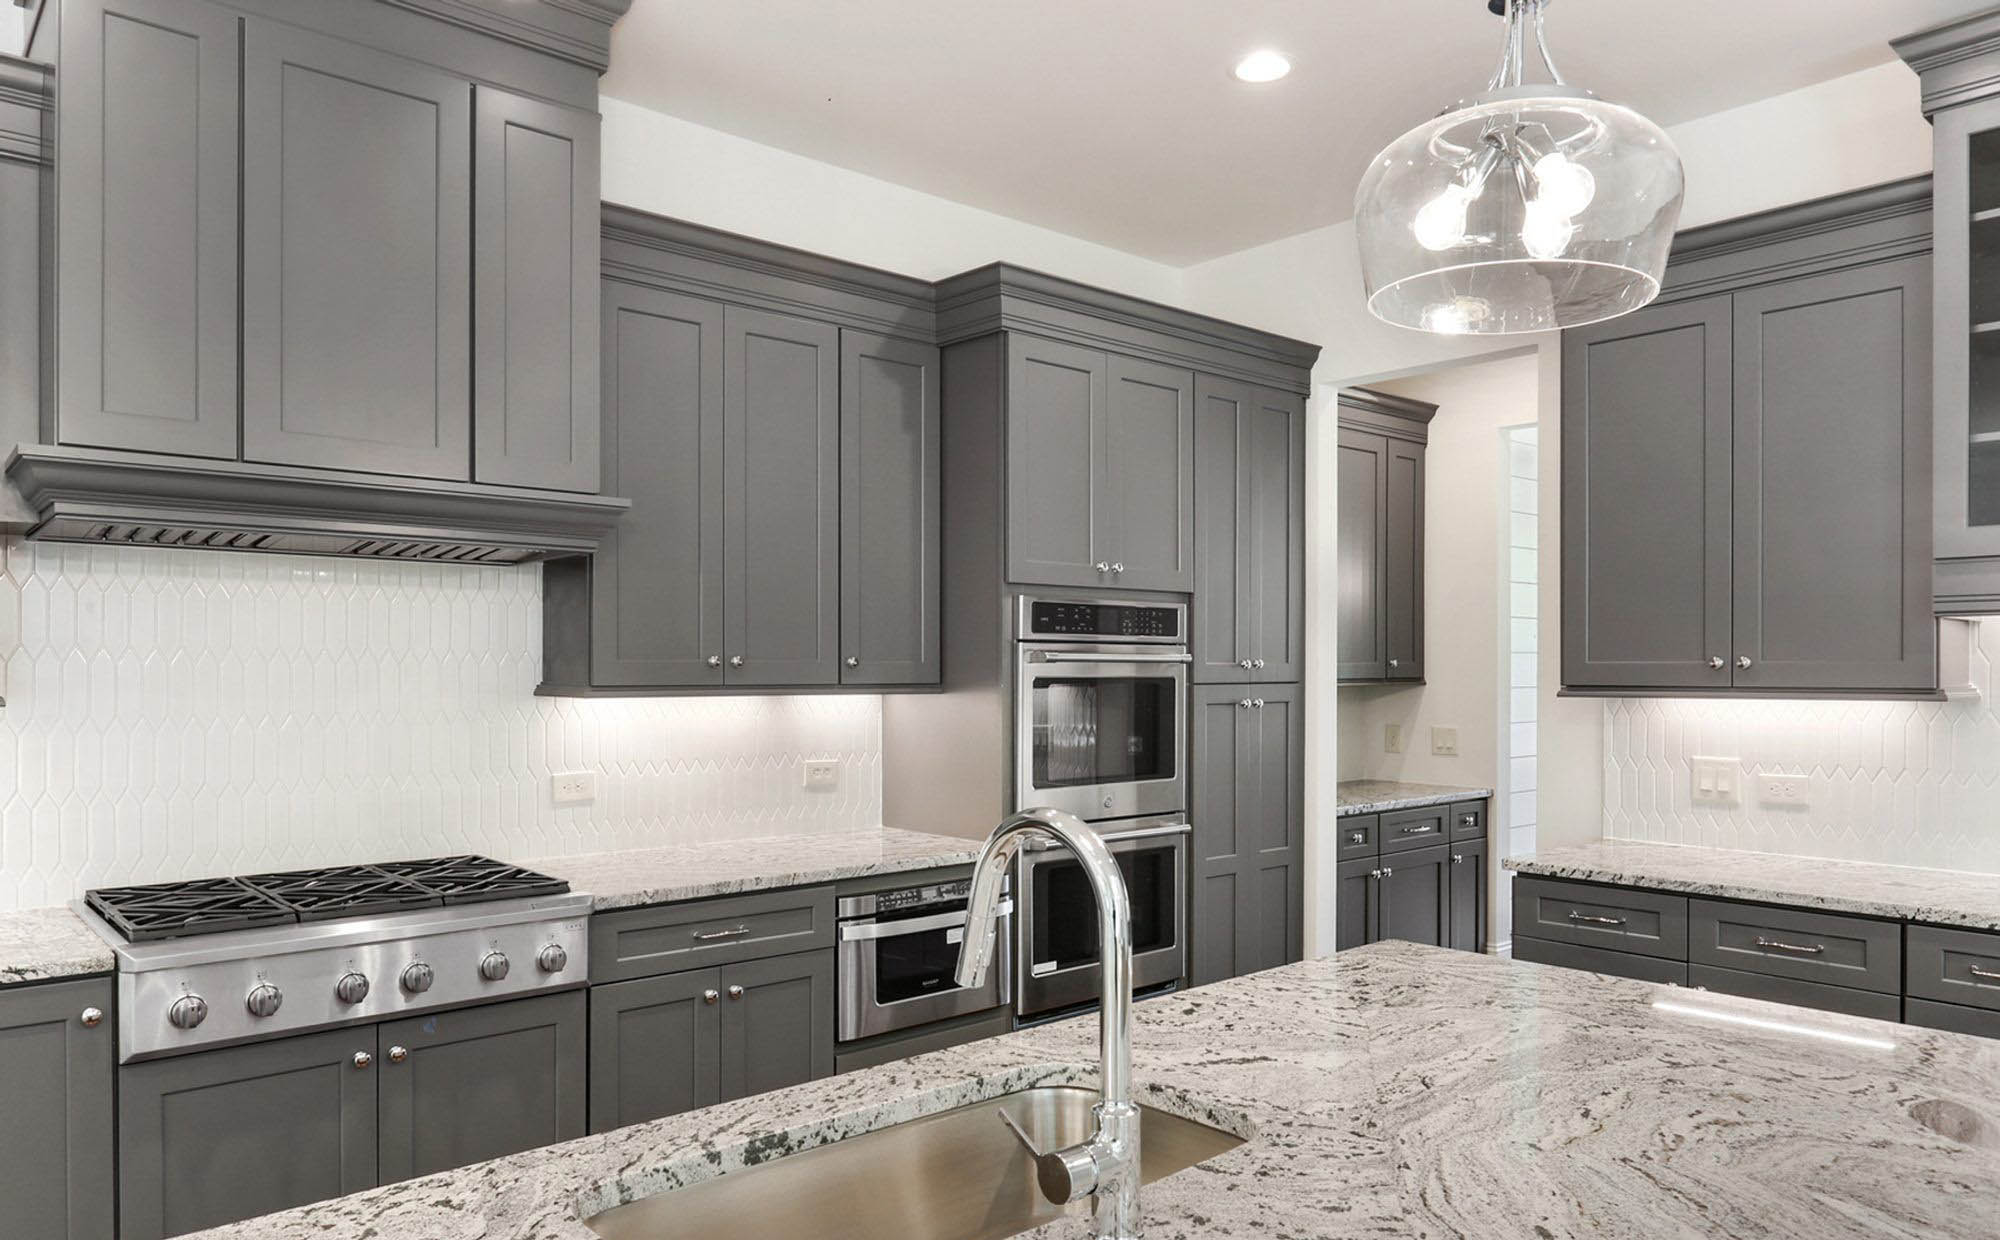 White and gray granite countertops with gray shaker style cabinets and white backsplash.